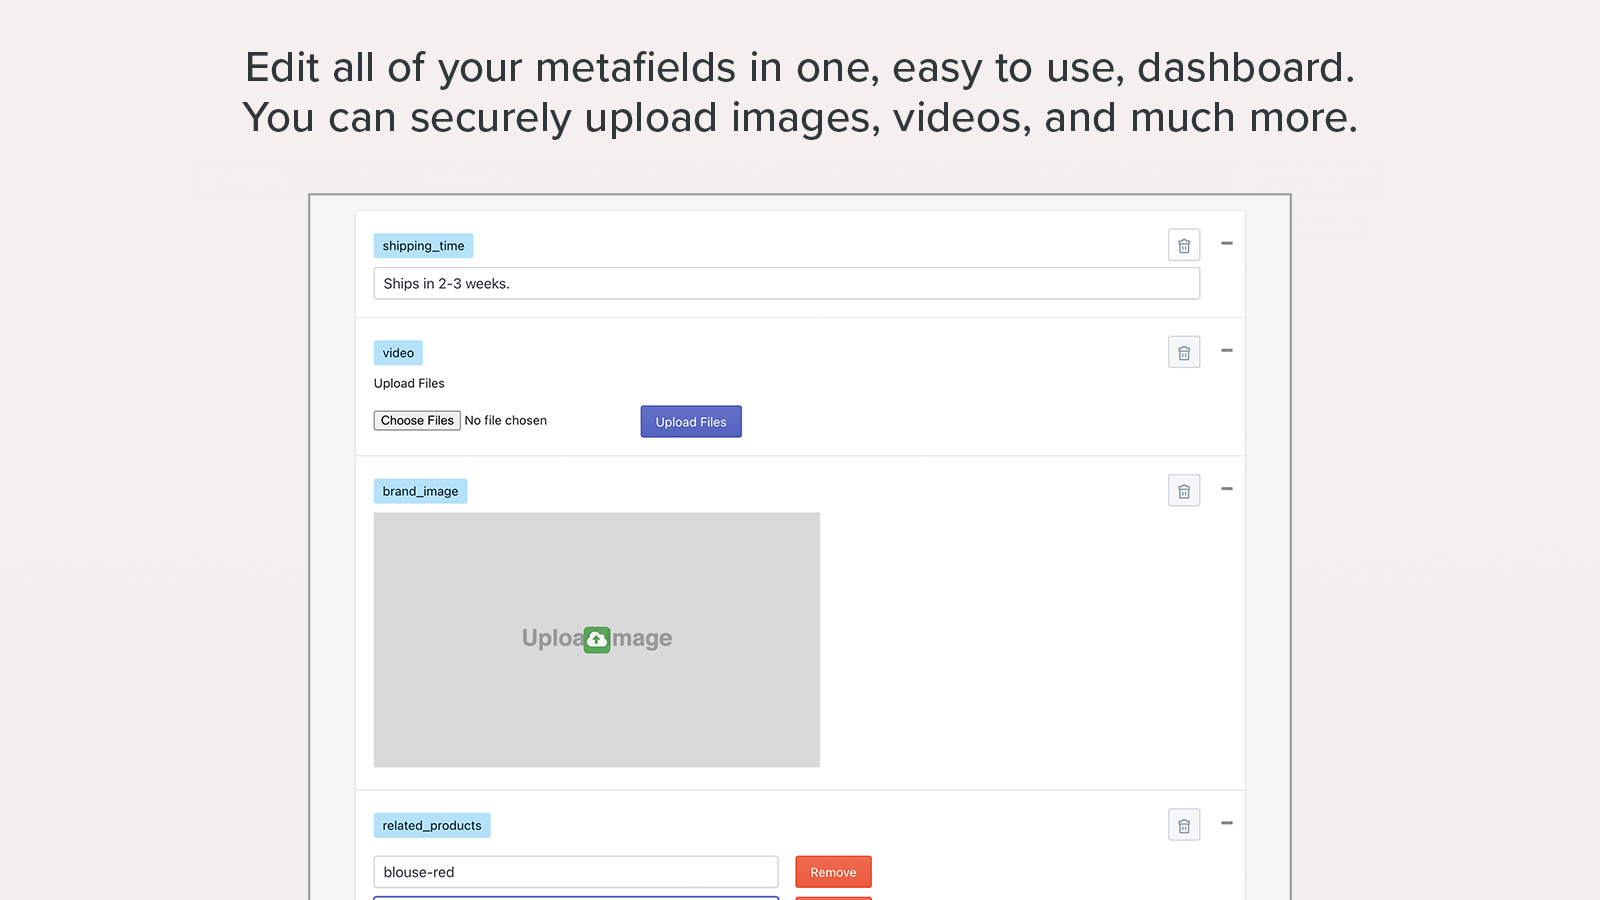 Edit all your metafields in one, easy to use, dashboard. You can